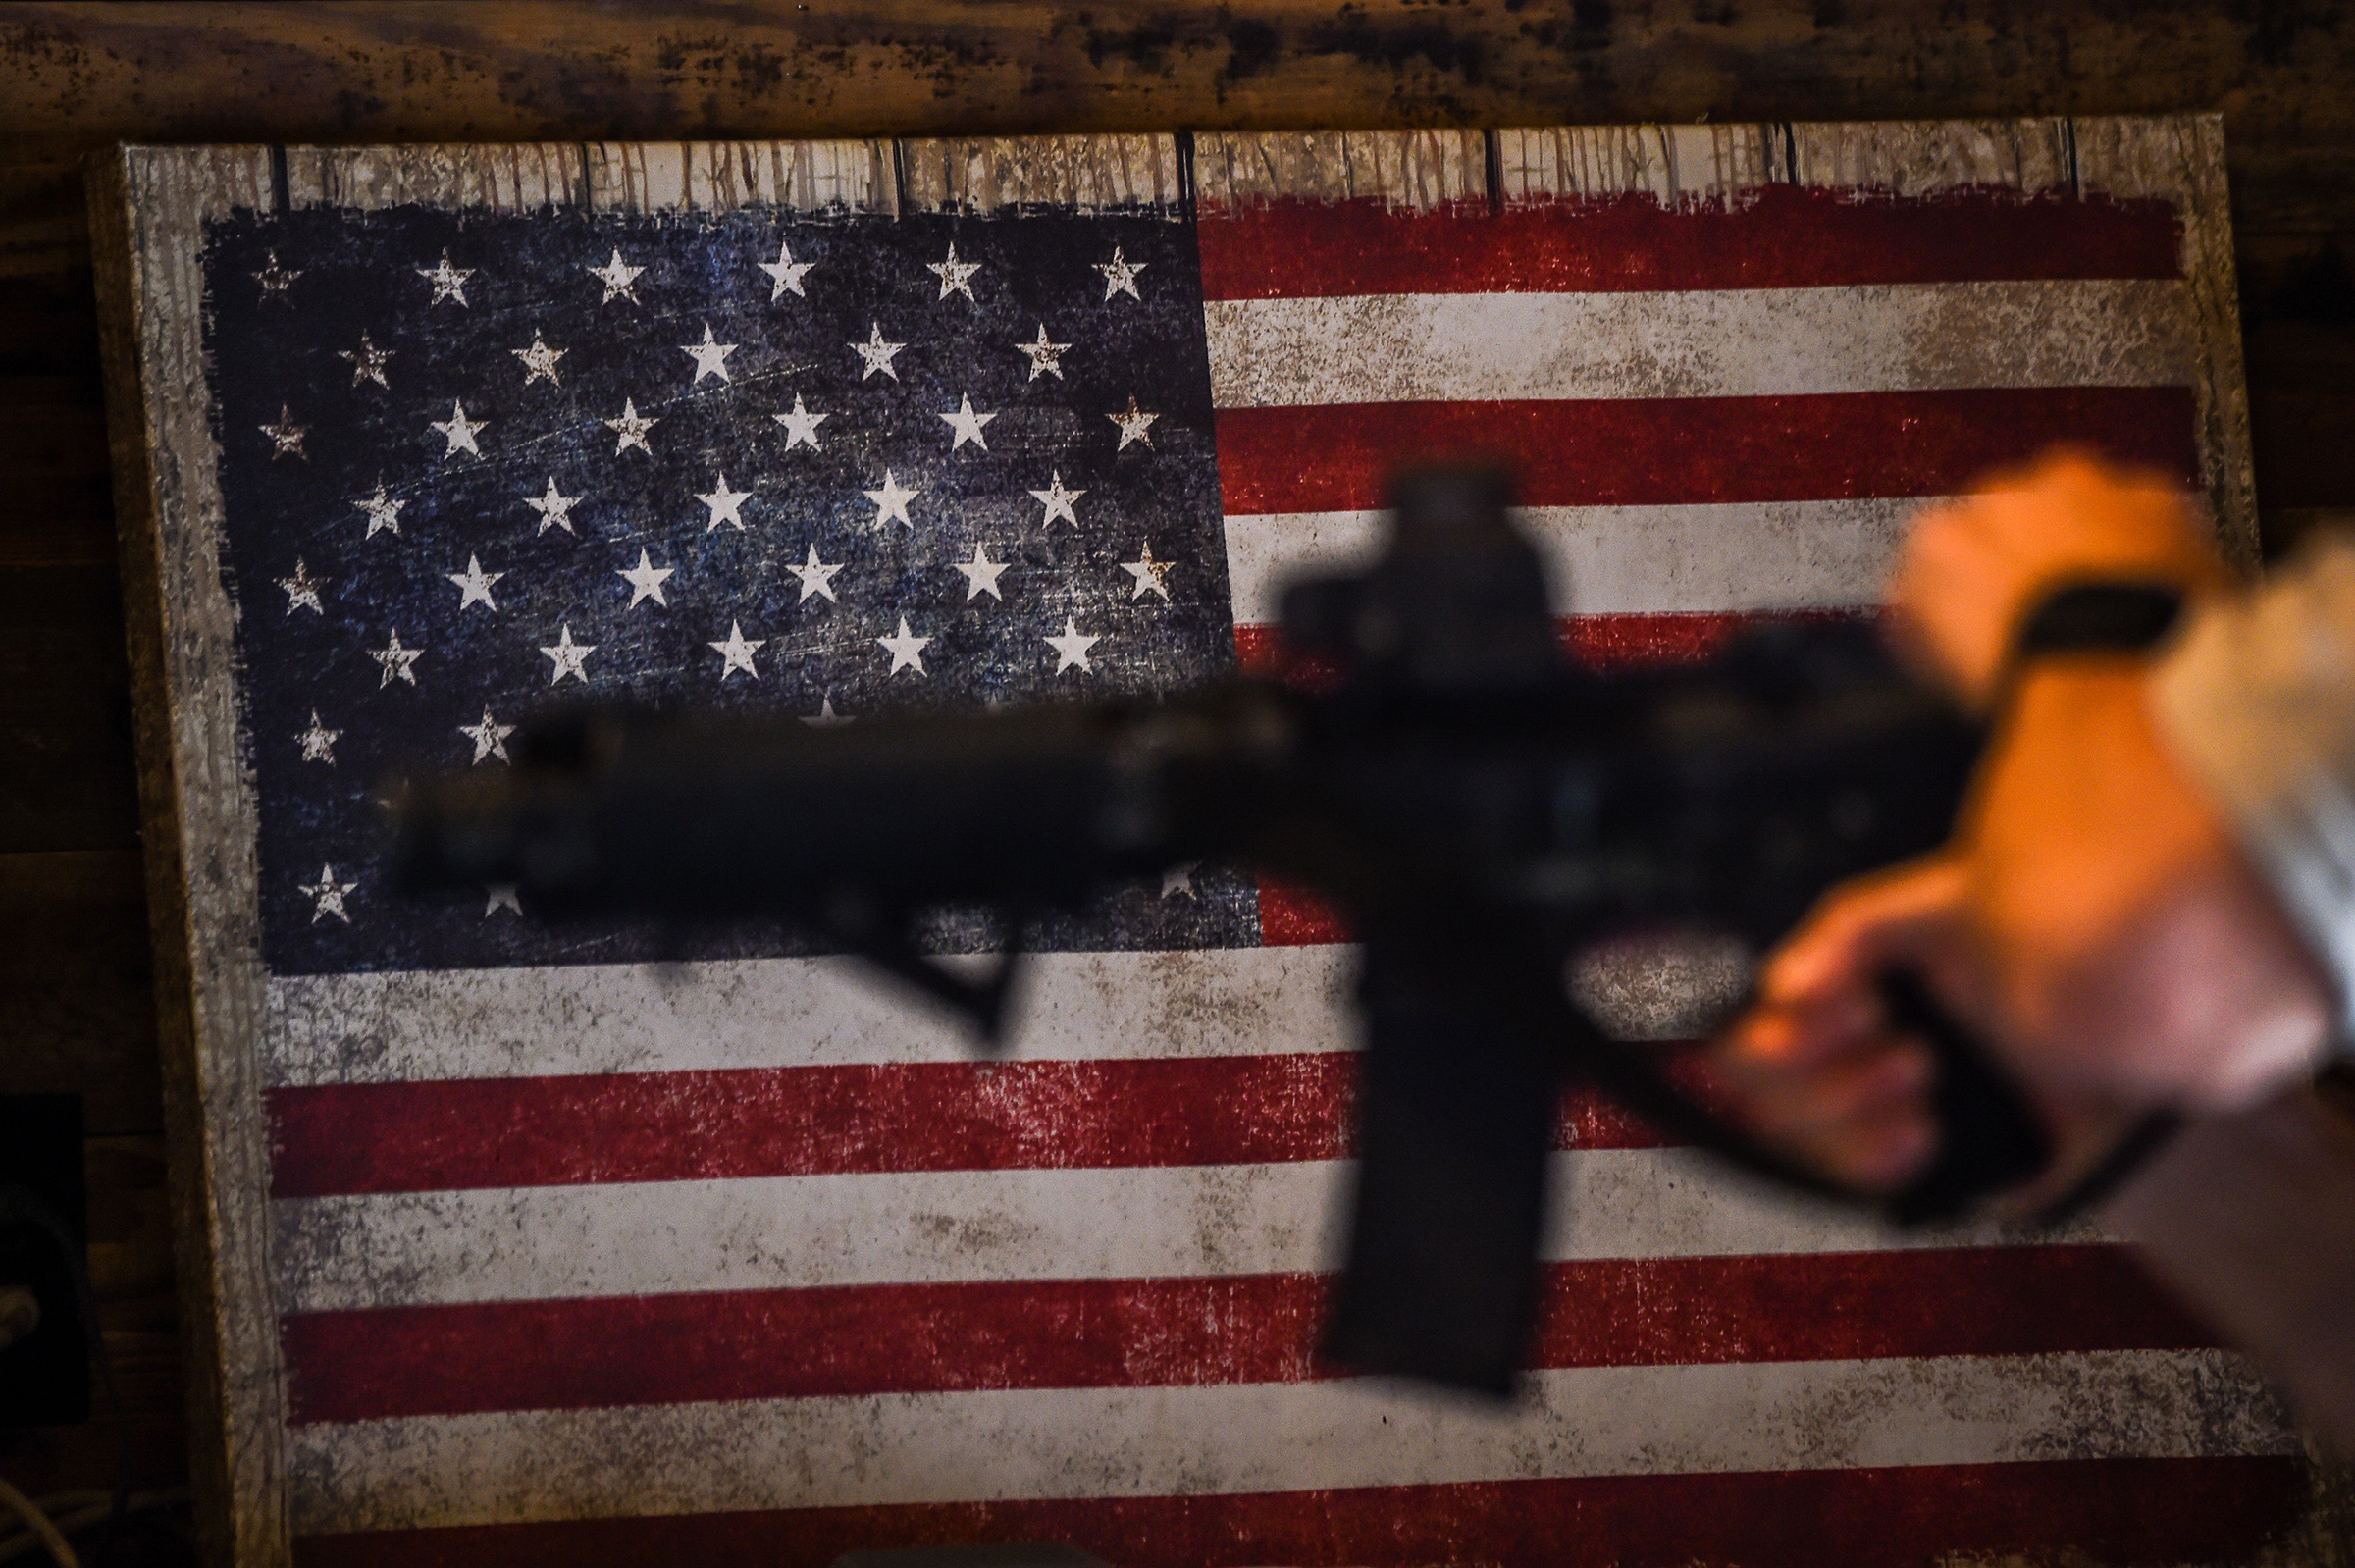 An instructor teaches handling of AR-15 semi-automatic rifles with a US flag in the background during a shooting course at Boondocks Firearms Academy in Jackson, Miss. on Sept. 26 (Chandan Khanna—AFP/Getty Images)